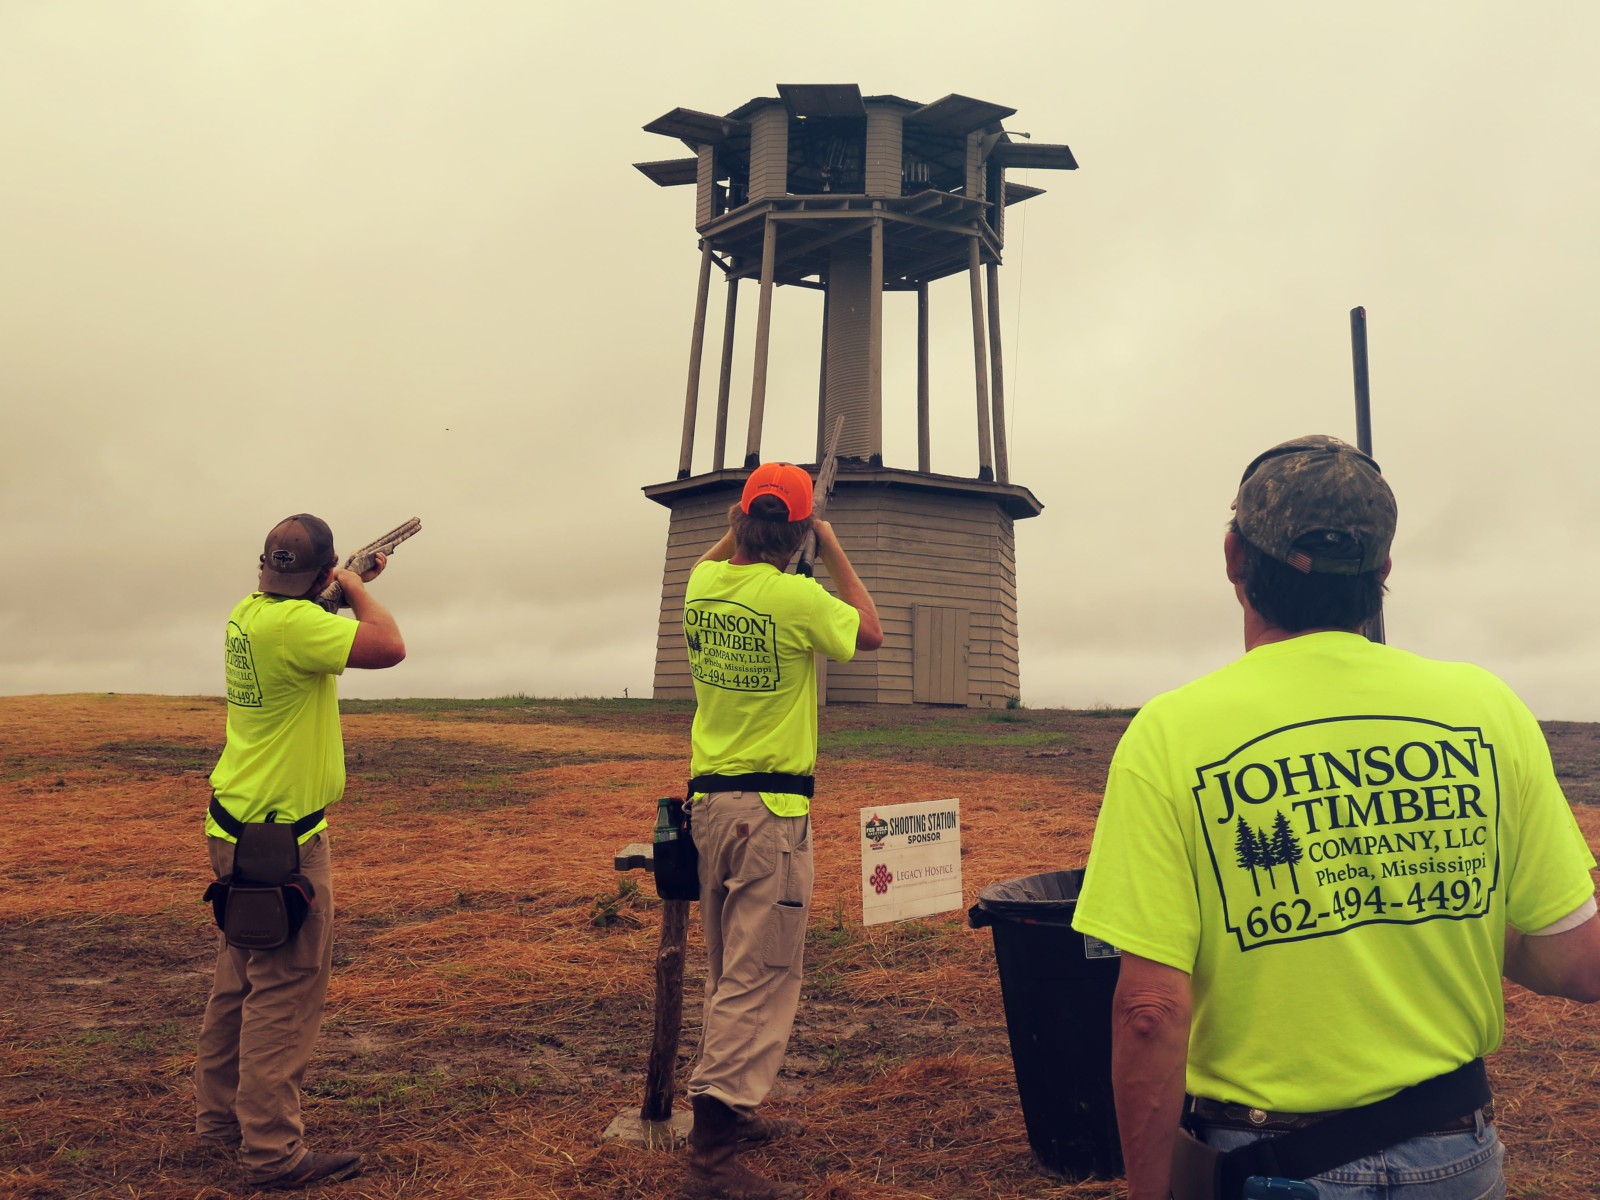 tower shoot at sporting clays